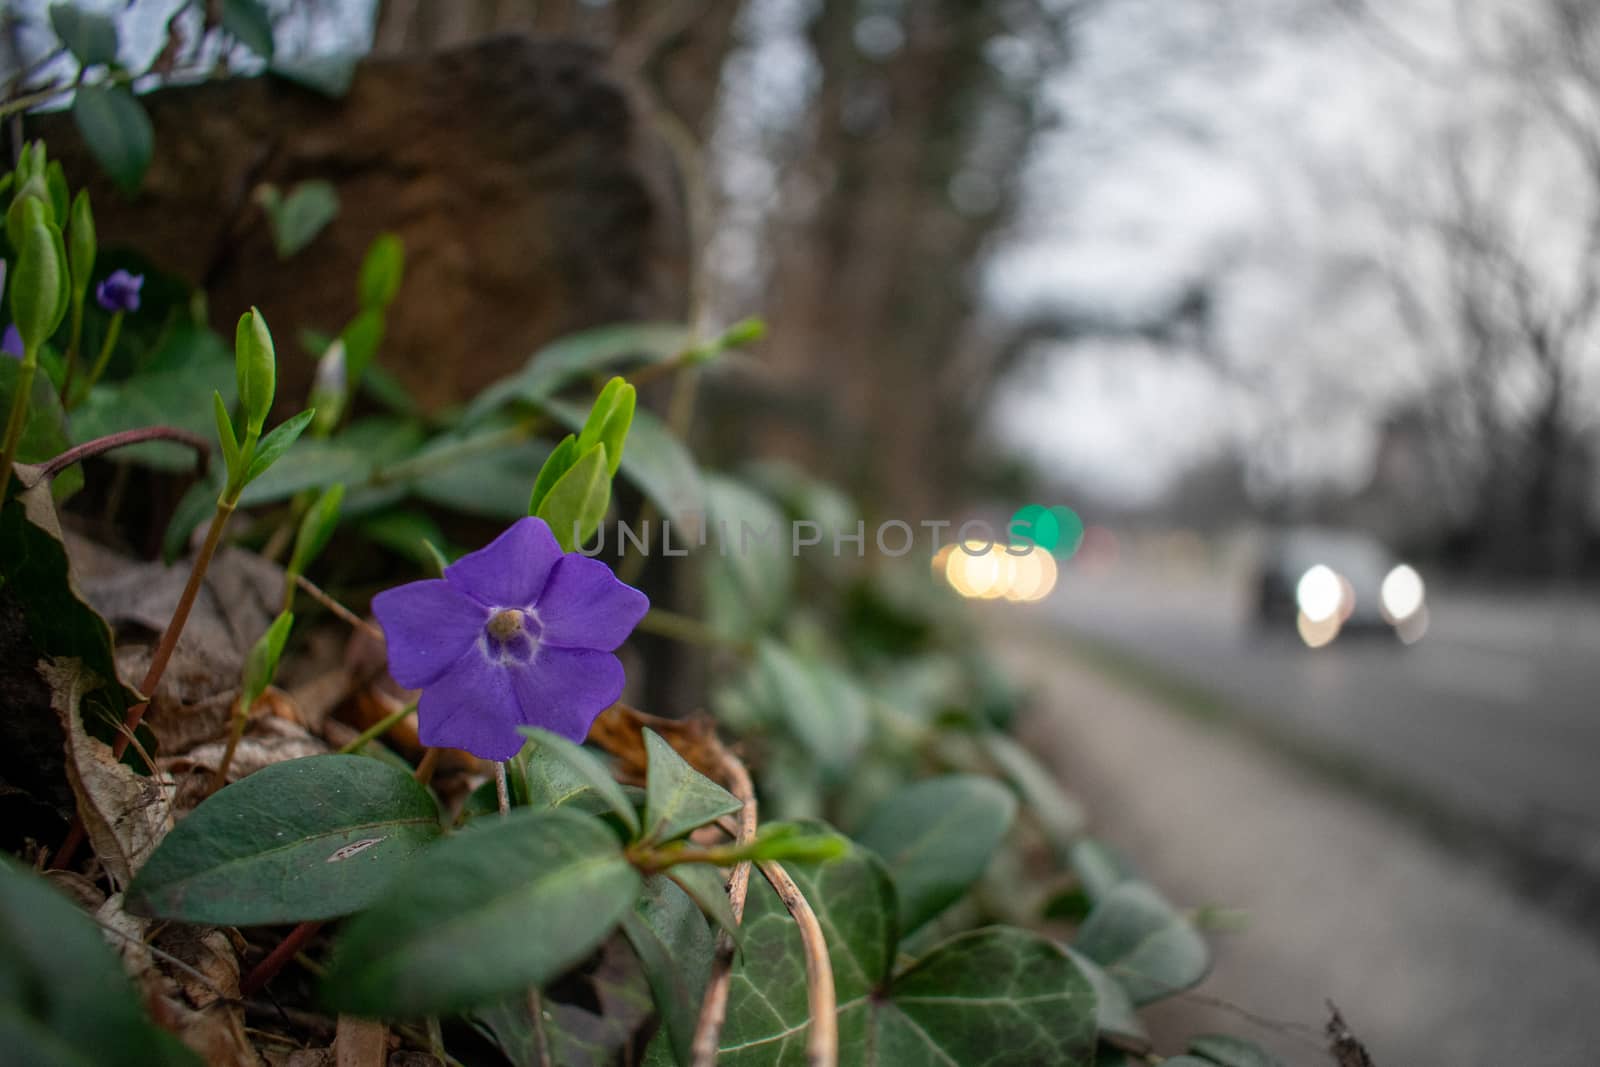 A Purple Flower on a Busy Suburban Street With Cars Driving By by bju12290